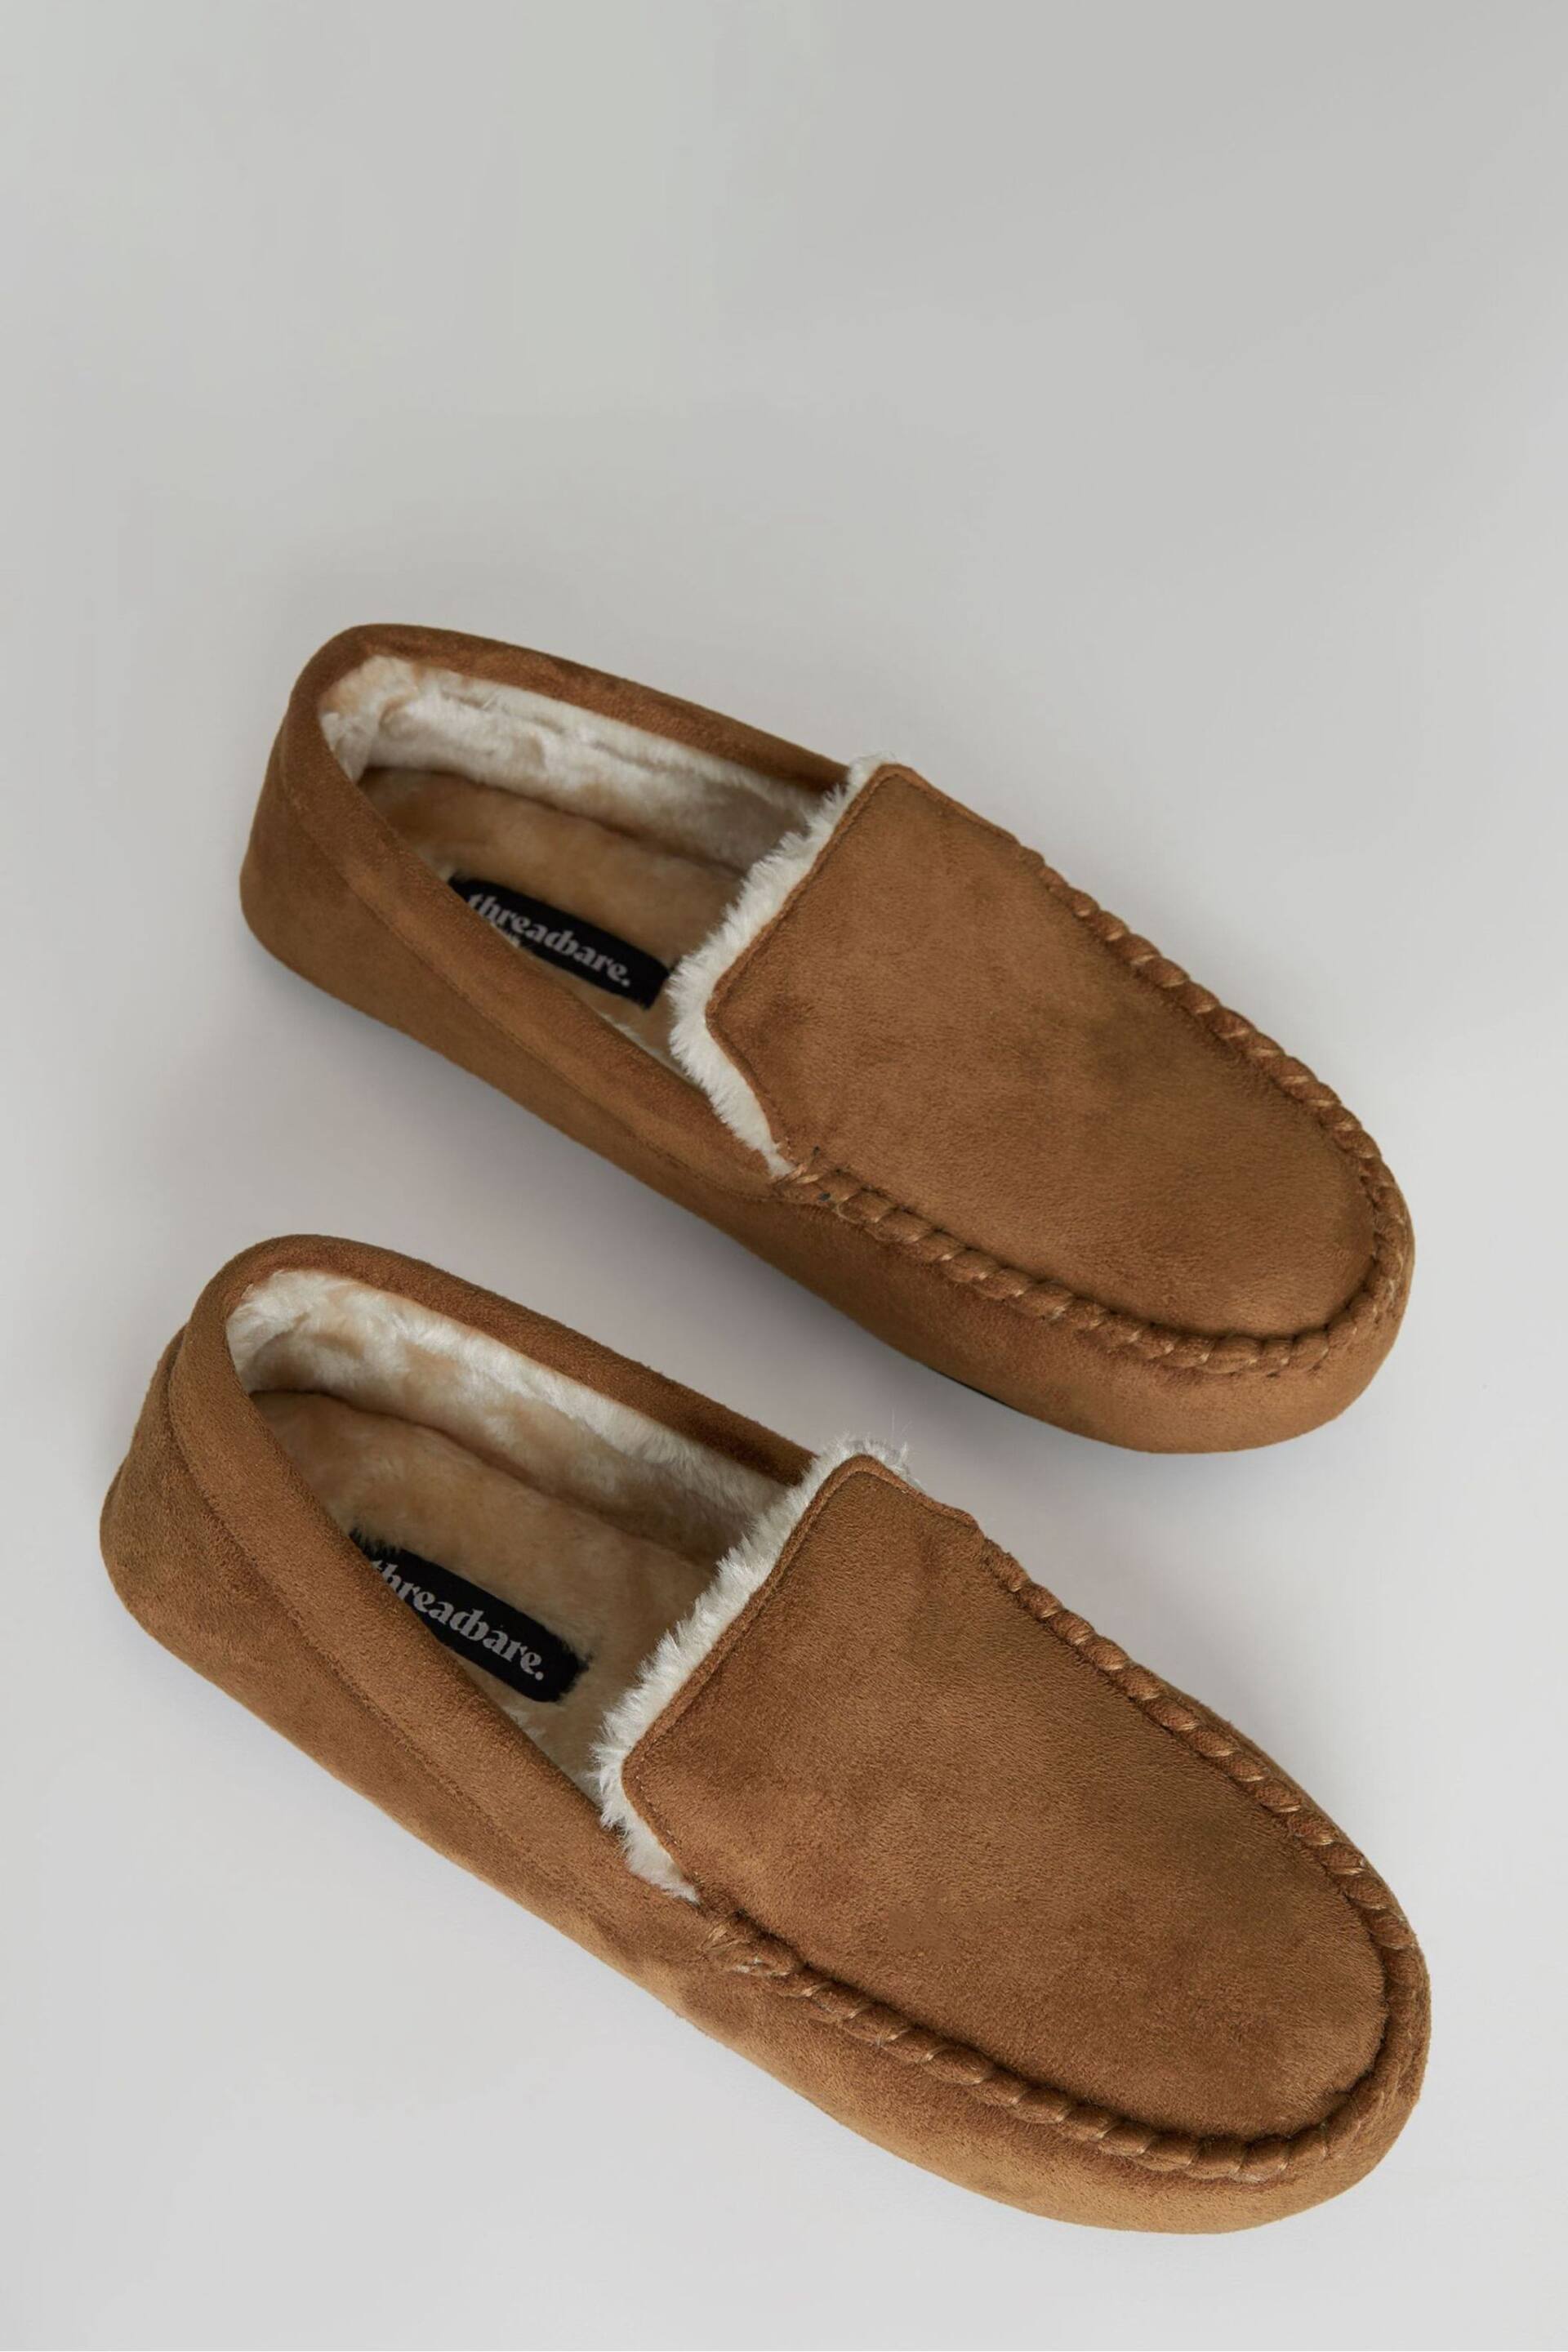 Threadbare Brown Faux Fur Lined Suedette Moccasin Slippers - Image 3 of 4